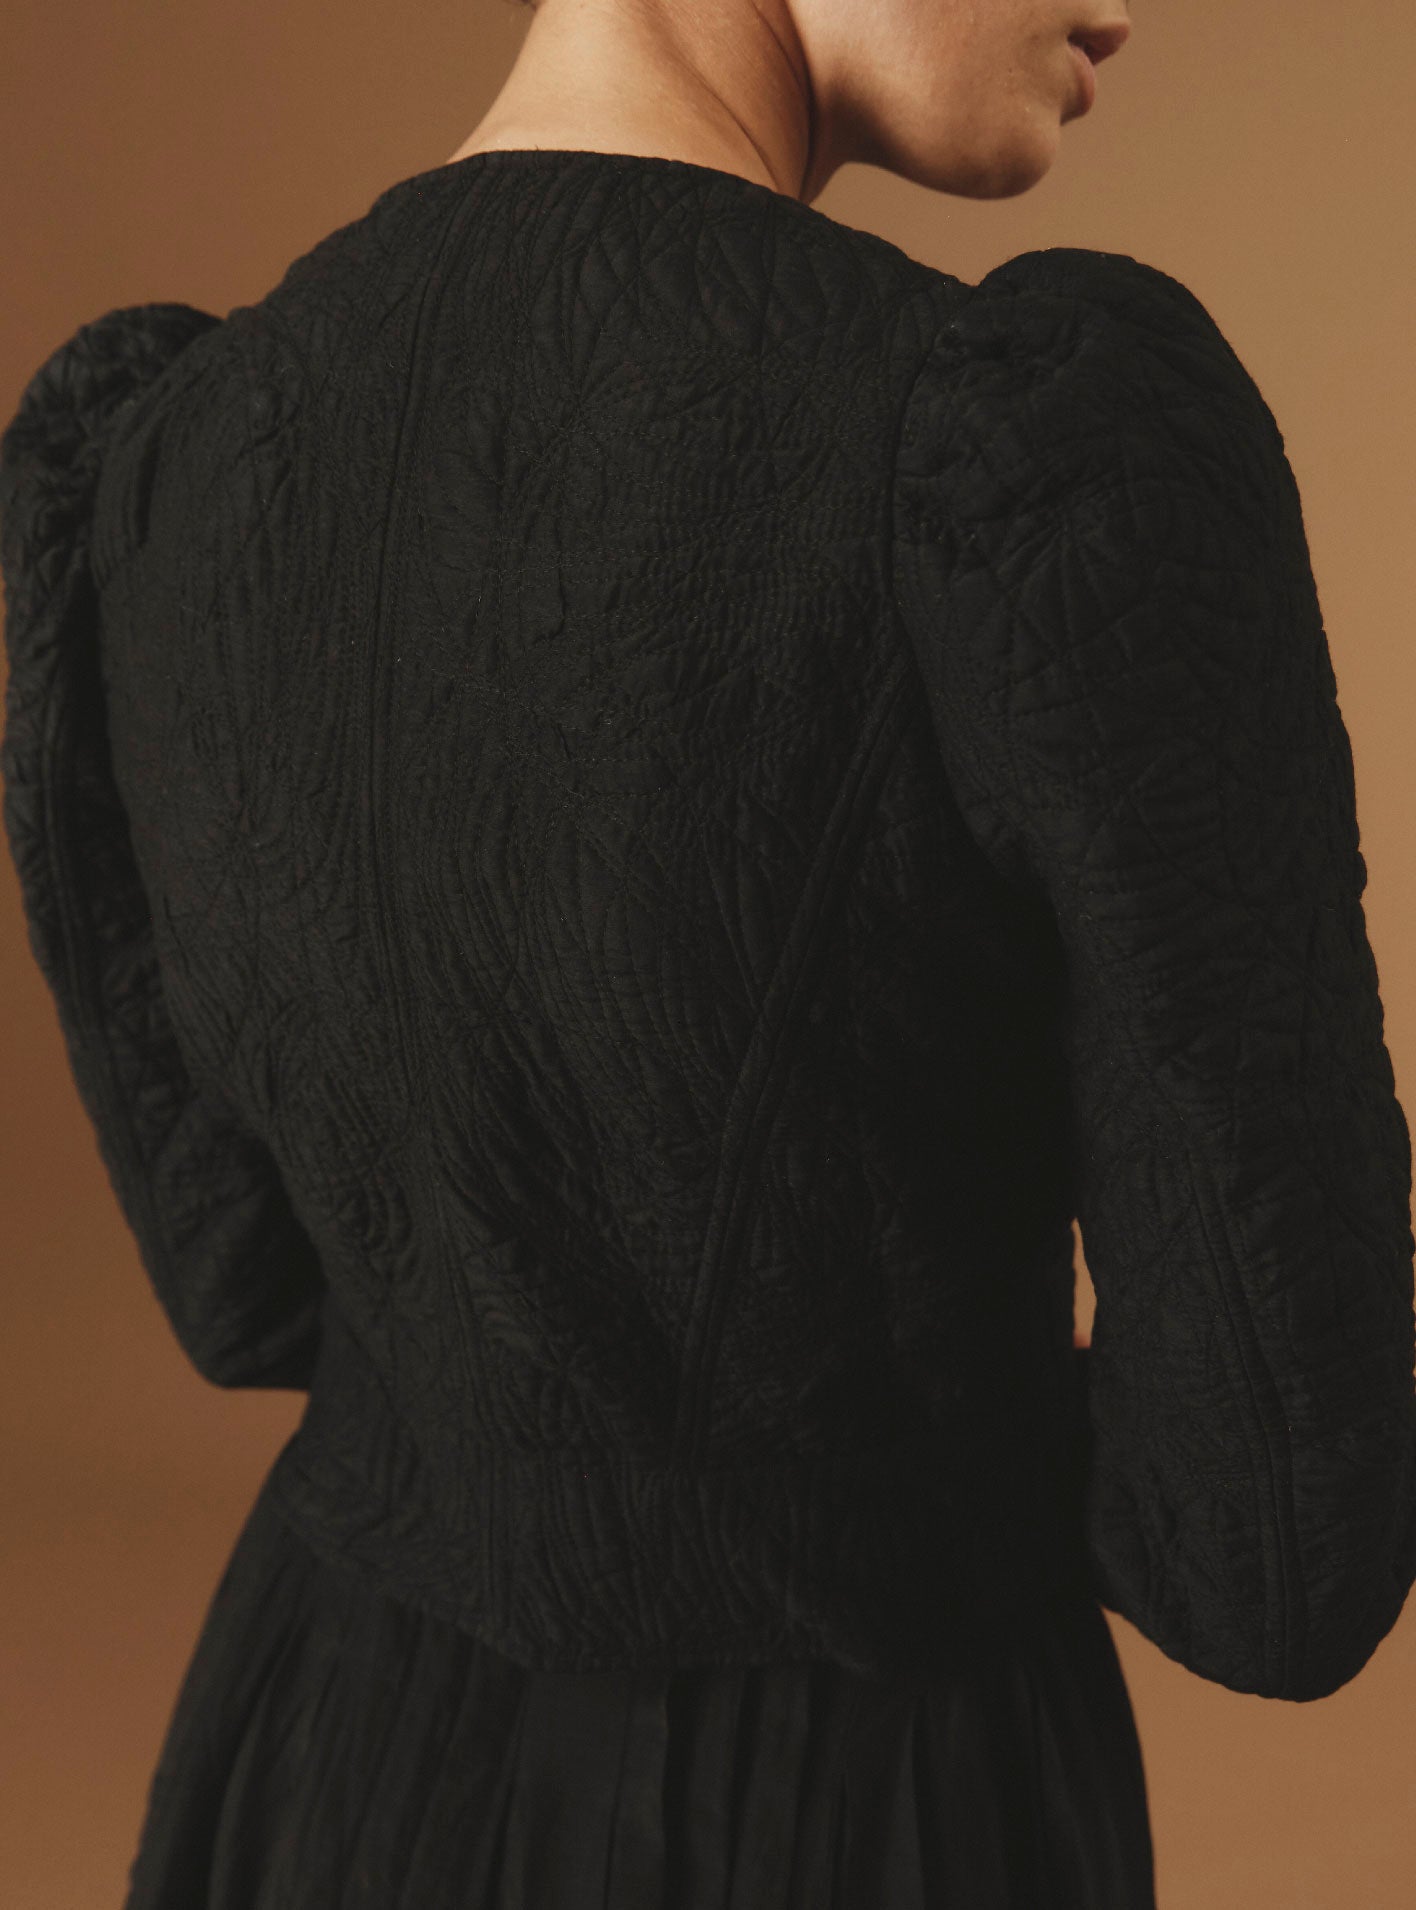 Back View of ARABELLA black Jacket by Thierry Colson, theme Boutis - Black